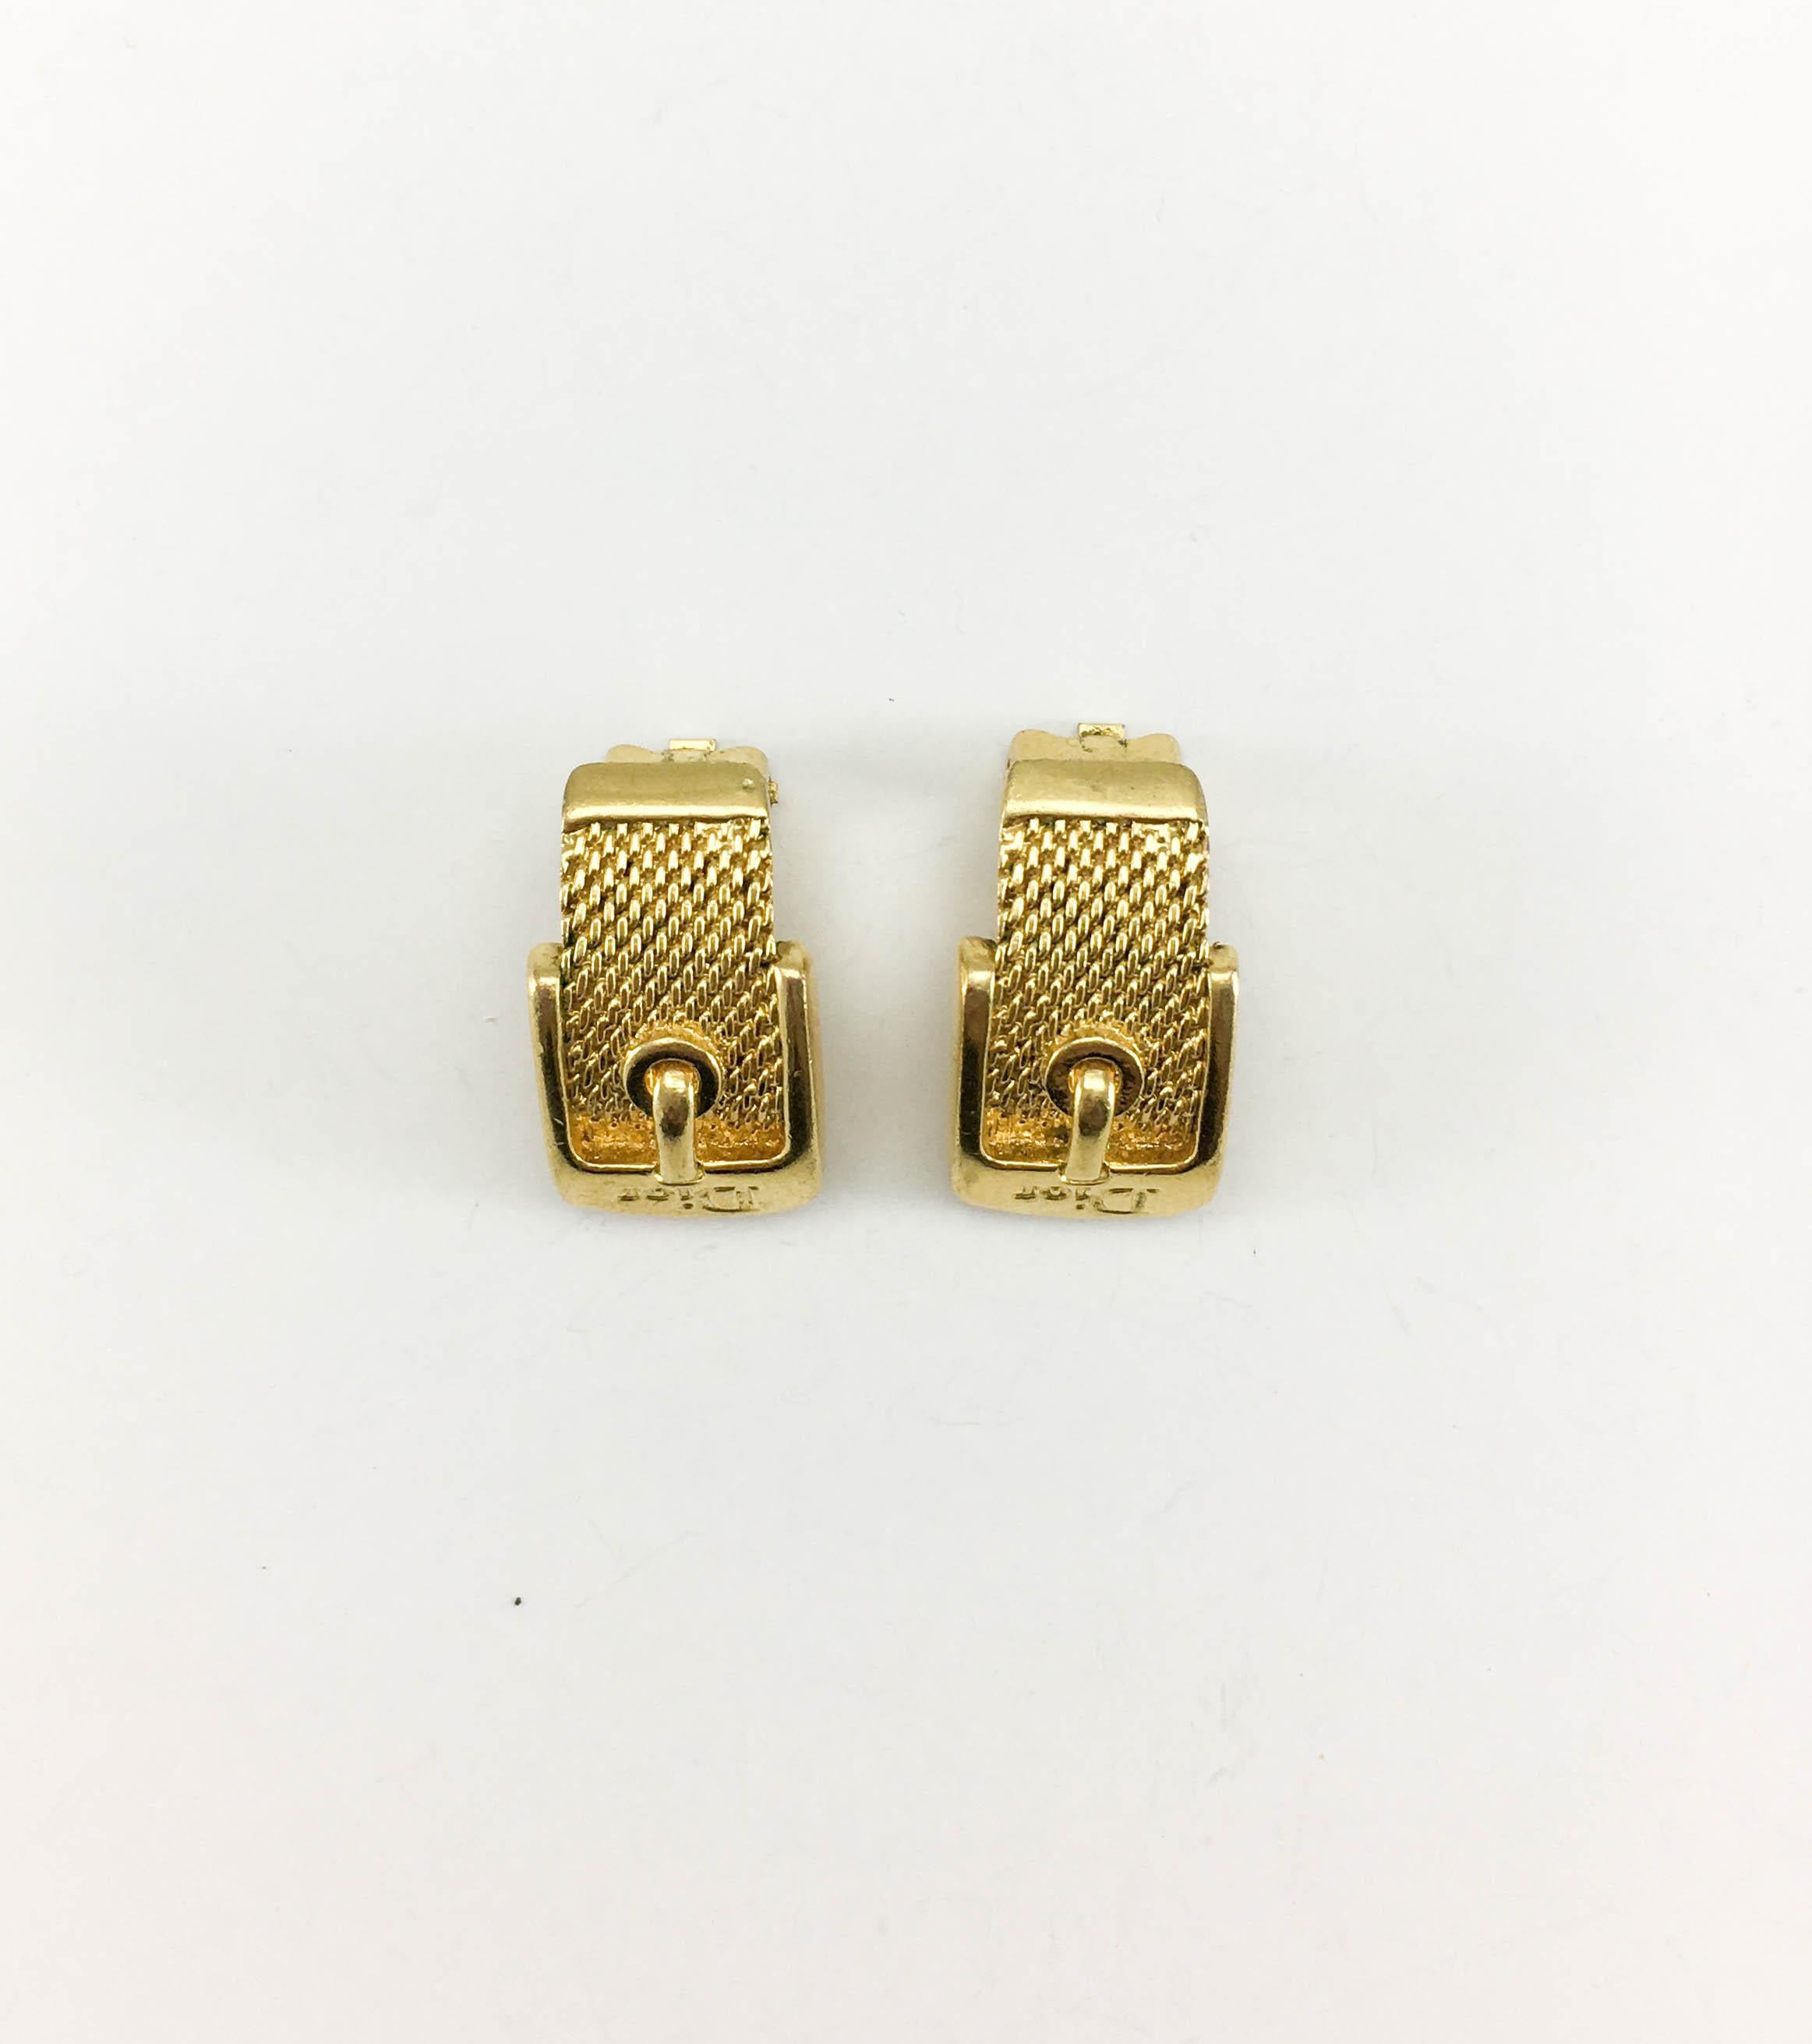 Vintage Dior Gilt Clip-On Buckle Earrings. These stylish earrings by Dior date back from the early 2000’s. Made in gilt metal, they are shaped as a buckle reading ‘Dior’ on the top. Dior signed on the back. The perfect understated piece of fashion